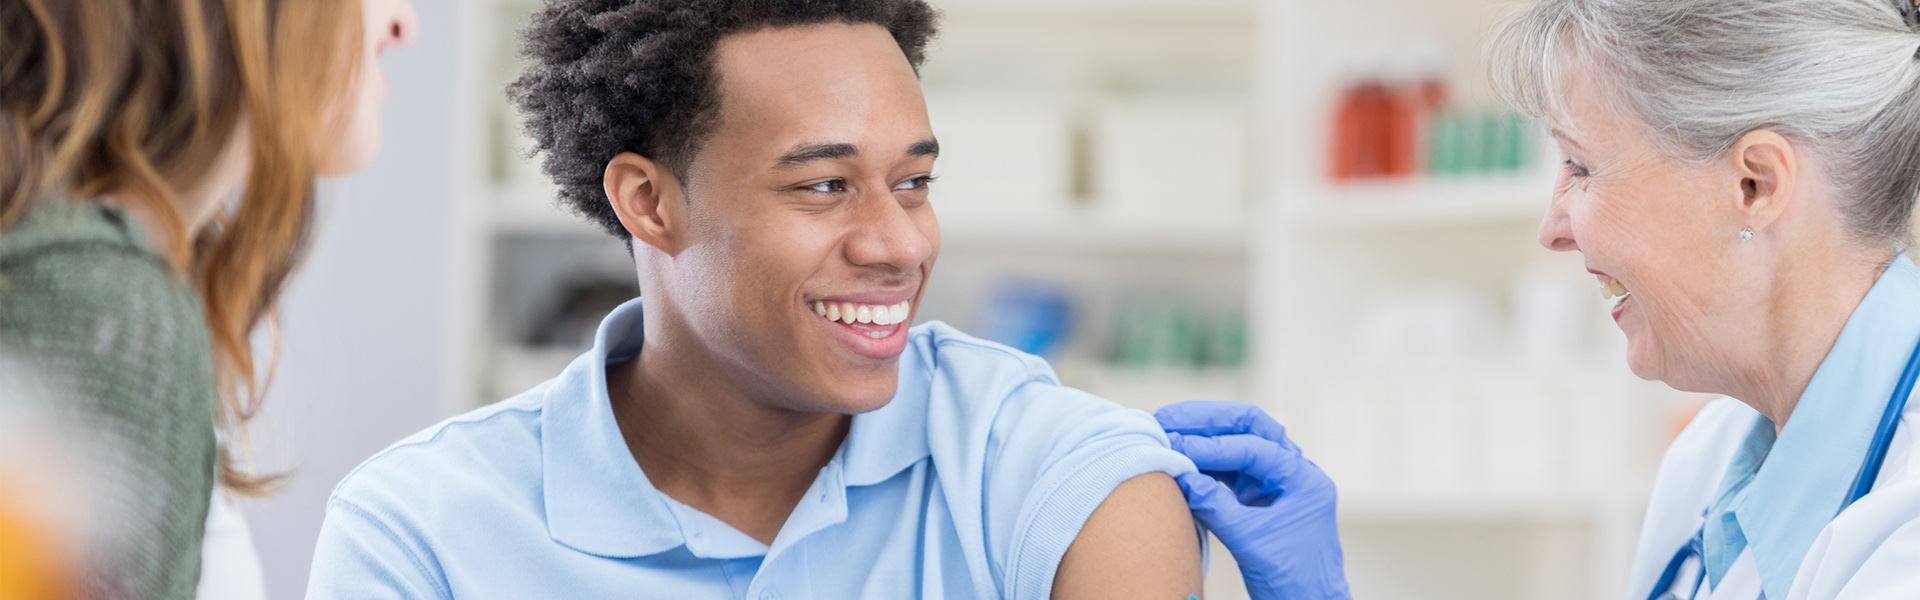 young man receiving a vaccine